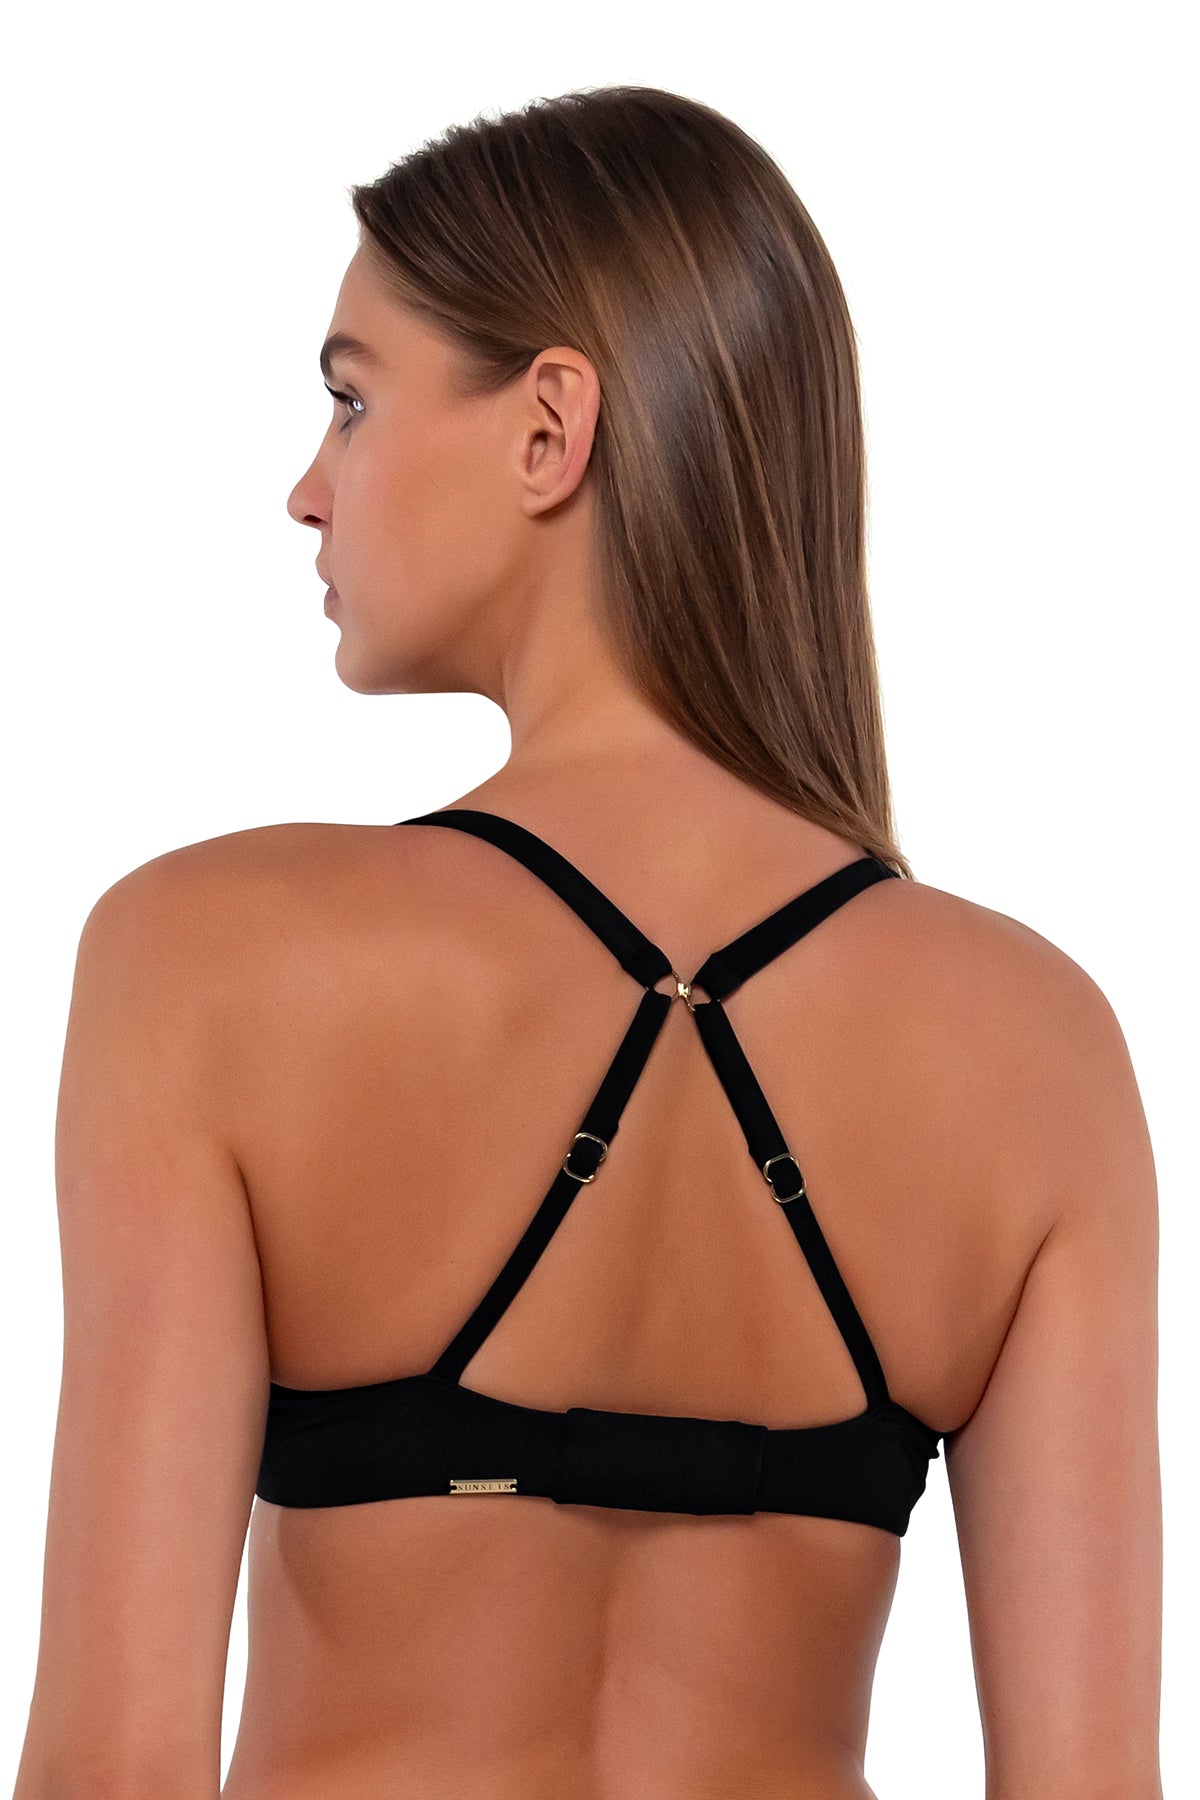 Back pose #1 of Daria wearing Sunsets Black Juliette Underwire Top showing crossback straps